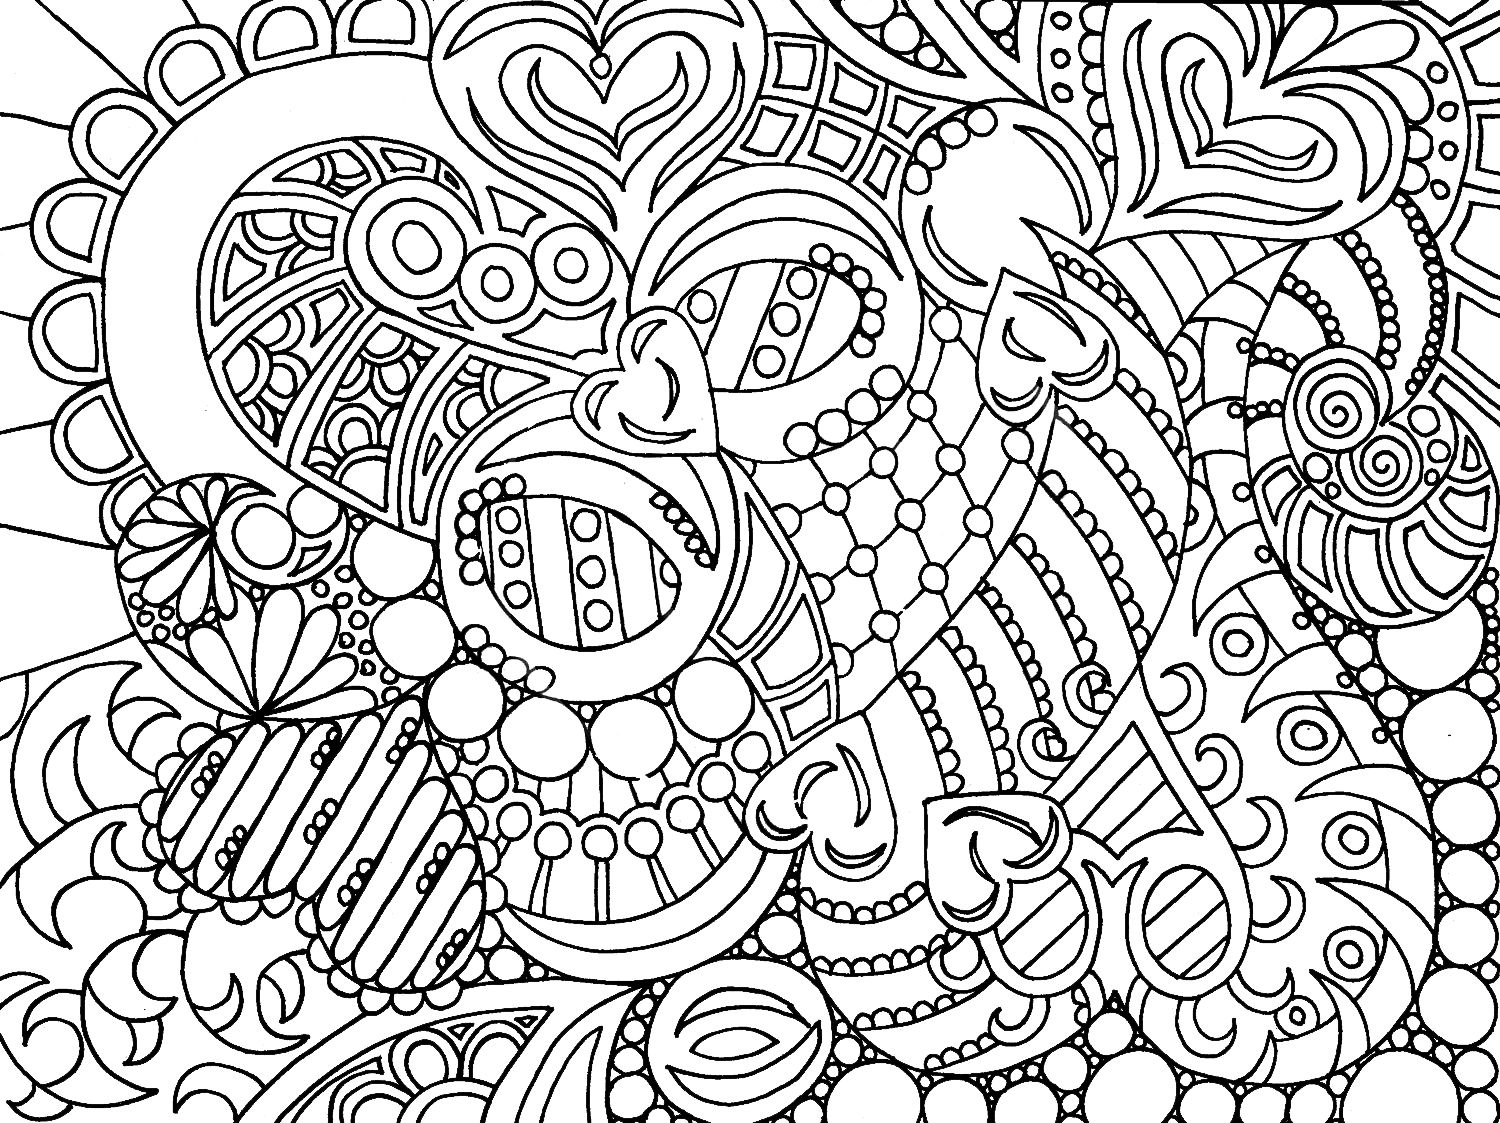 Amazing of Simple Coloring Pages For Adults For Adult Co #3223